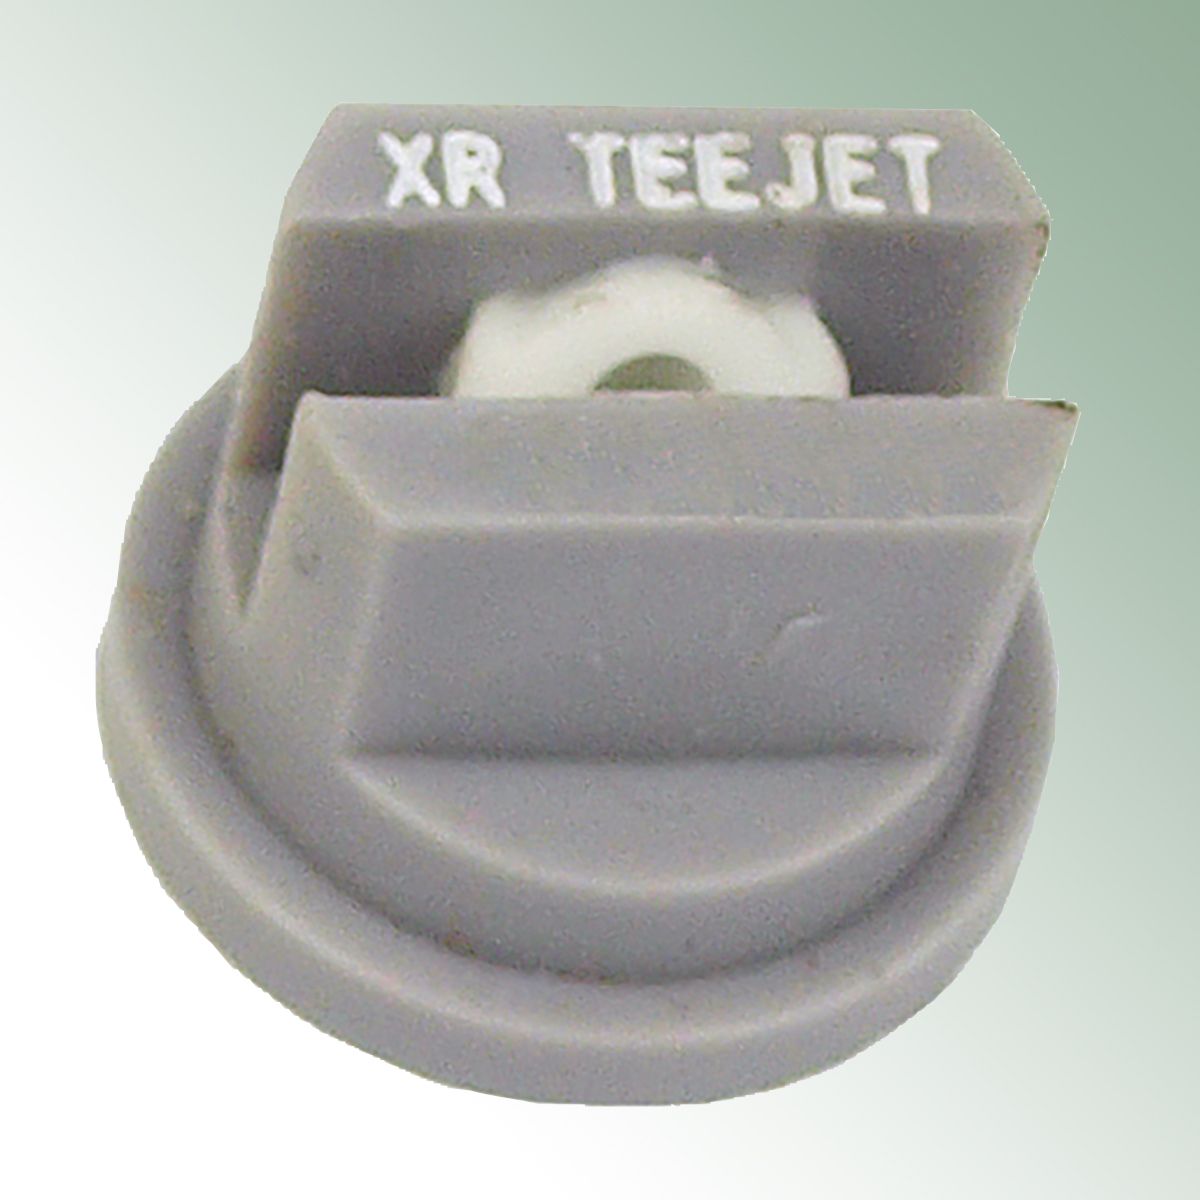 Mouth piece Grey for Teejet- nozzle, Spraying angle 80° Size 06, Ceramic Insert